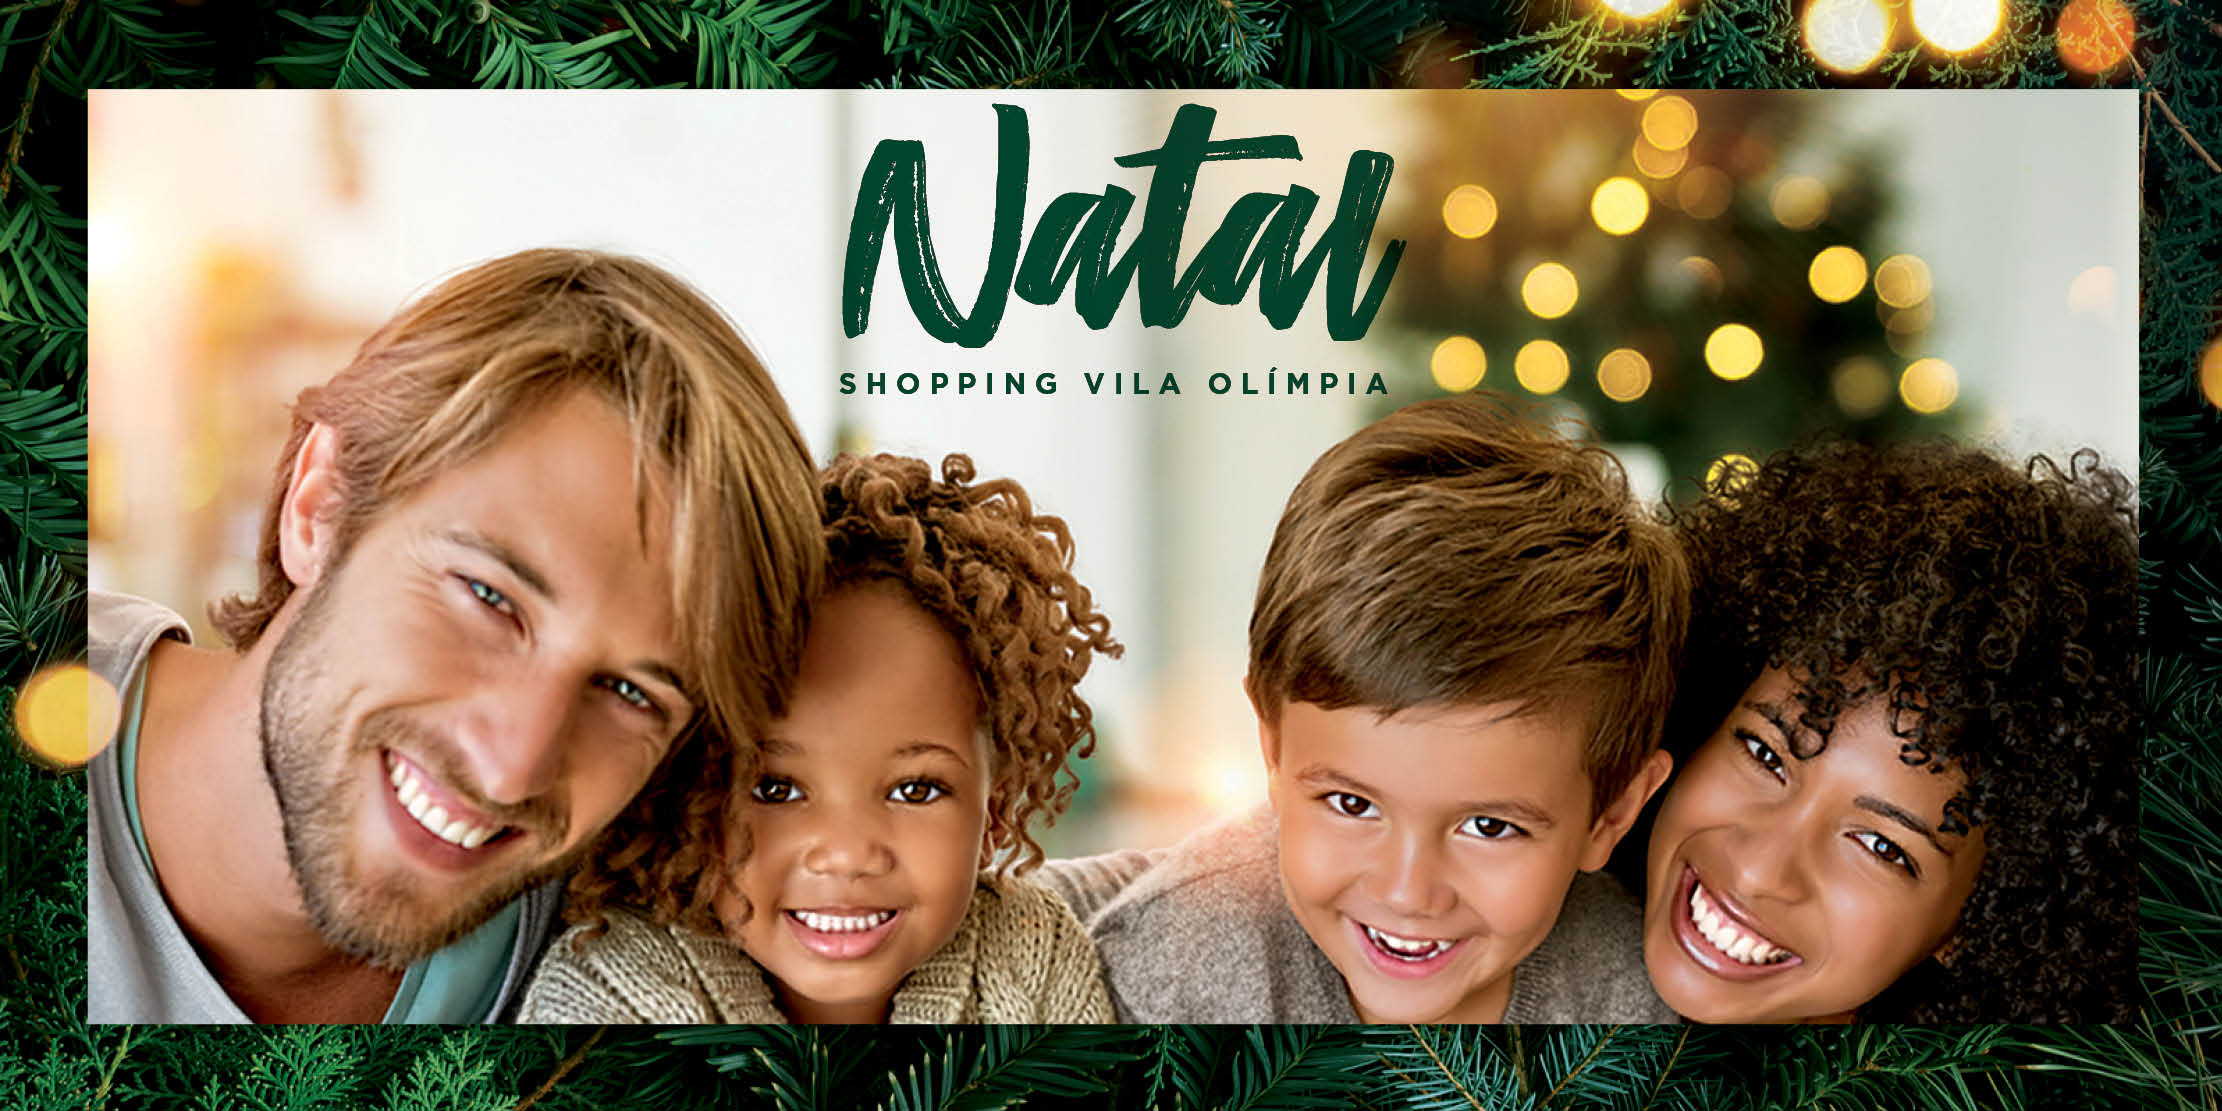 Featured image for “Natal do Shopping Vila Olímpia”